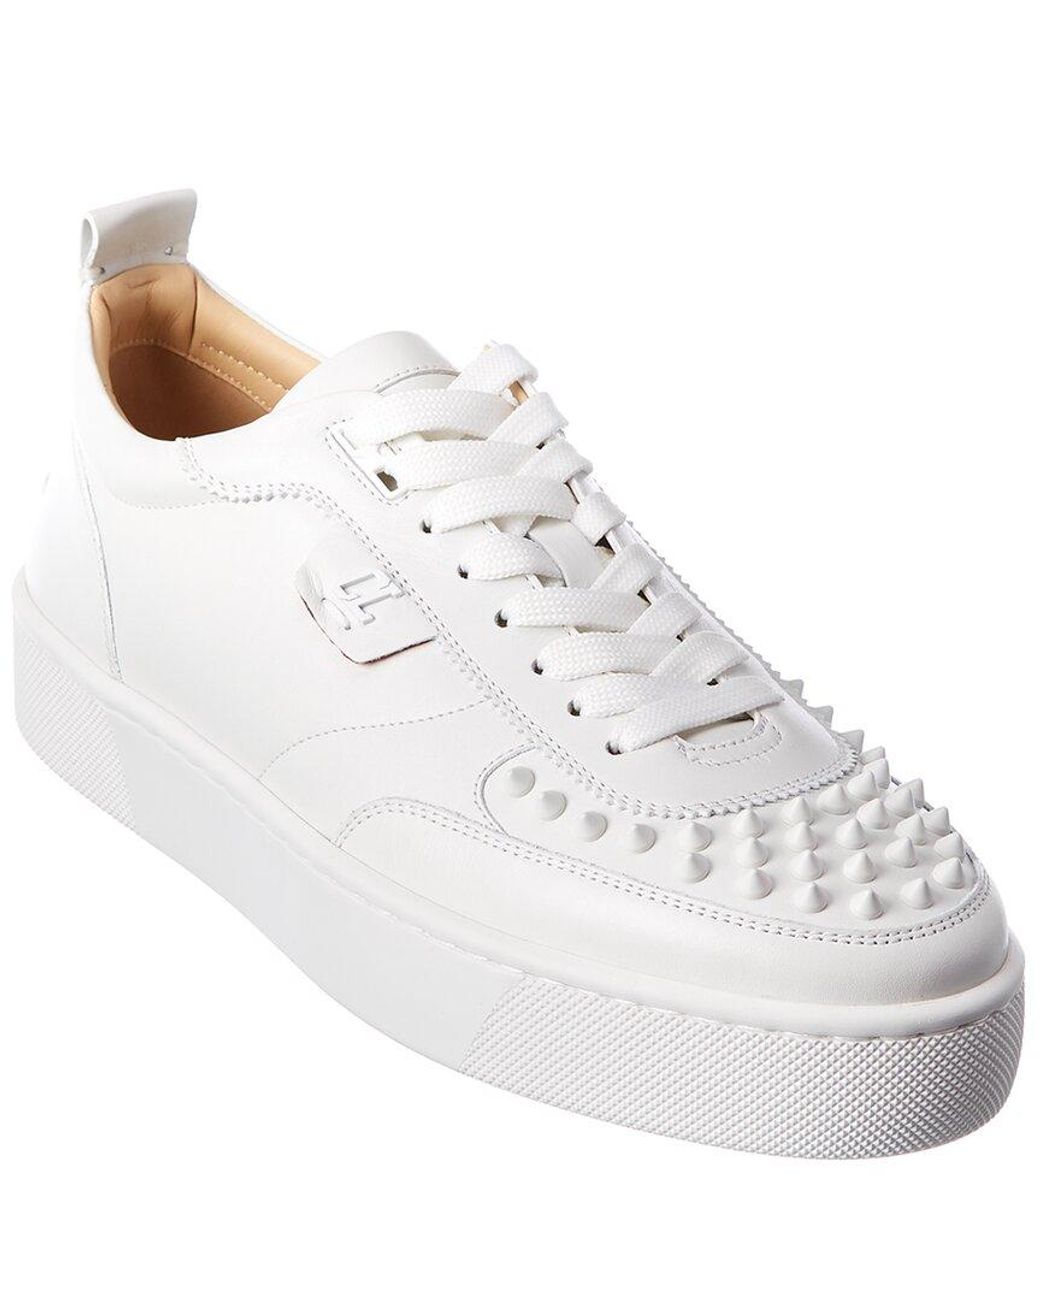 Christian Louboutin Happyrui Spikes Leather Sneaker in White for Men | Lyst